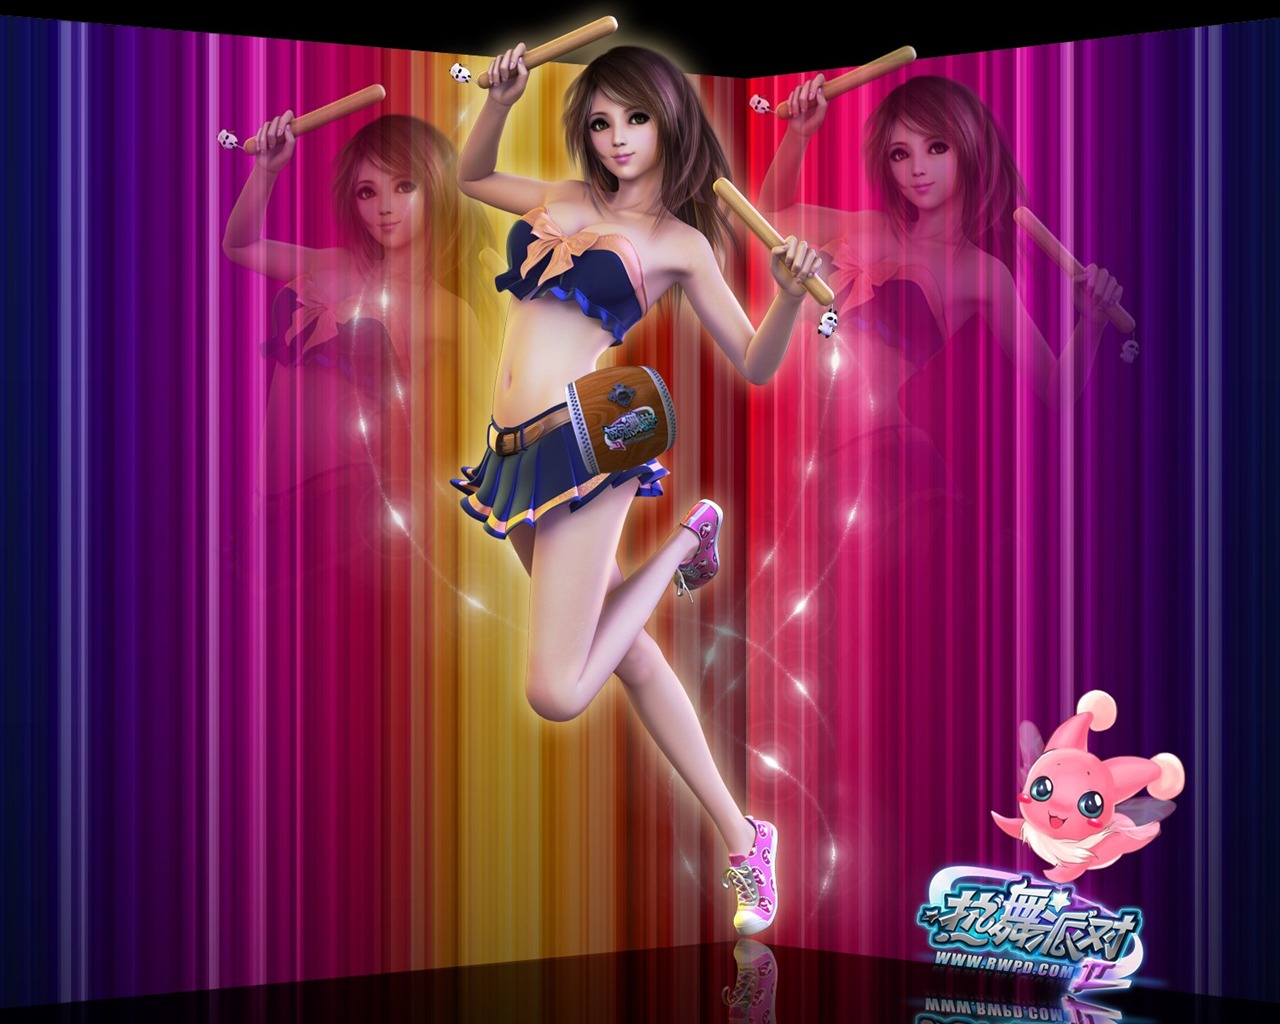 Online game Hot Dance Party II official wallpapers #18 - 1280x1024